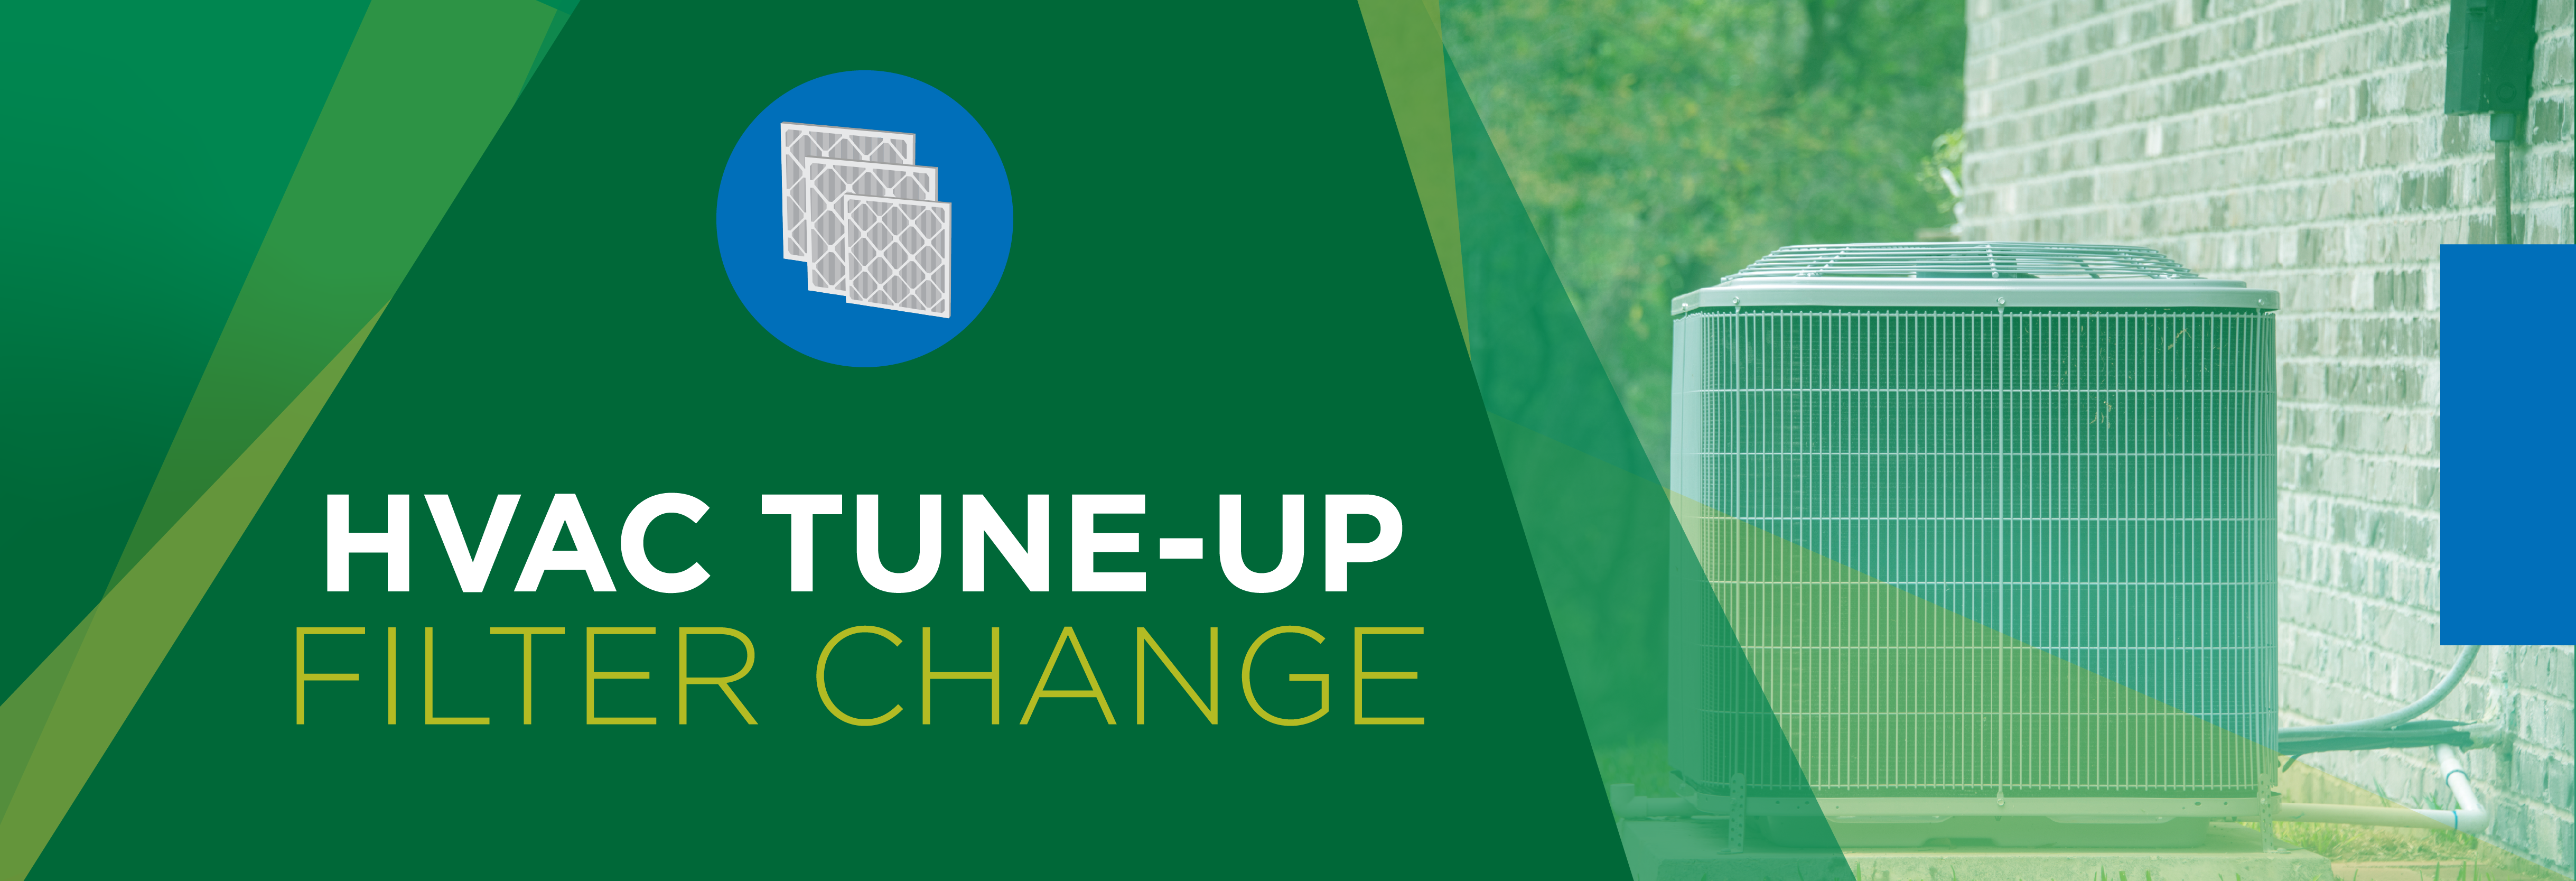 SECO News HVAC Tune-Up and Filter Change June 2019